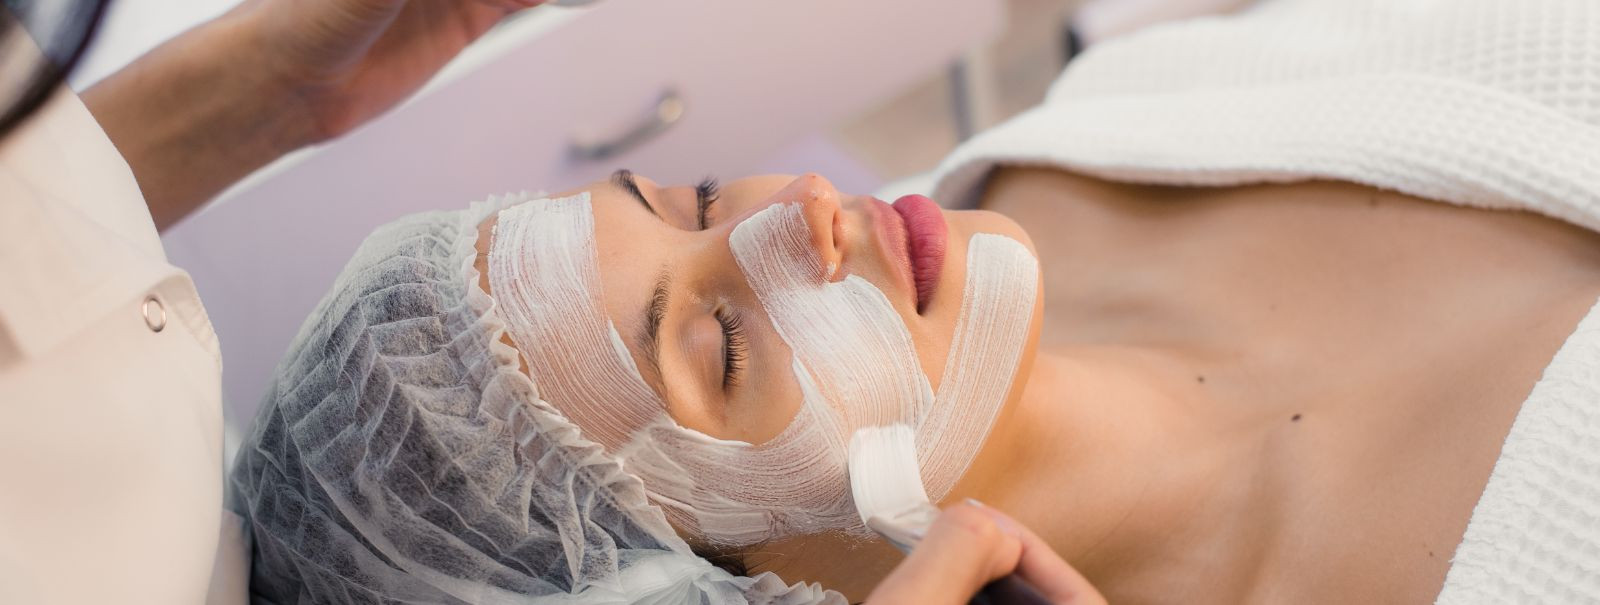 Every individual's skin is as unique as their fingerprint, which is why a one-size-fits-all approach to facials simply doesn't cut it. At TIIA KOSMEETIKA OÜ, we